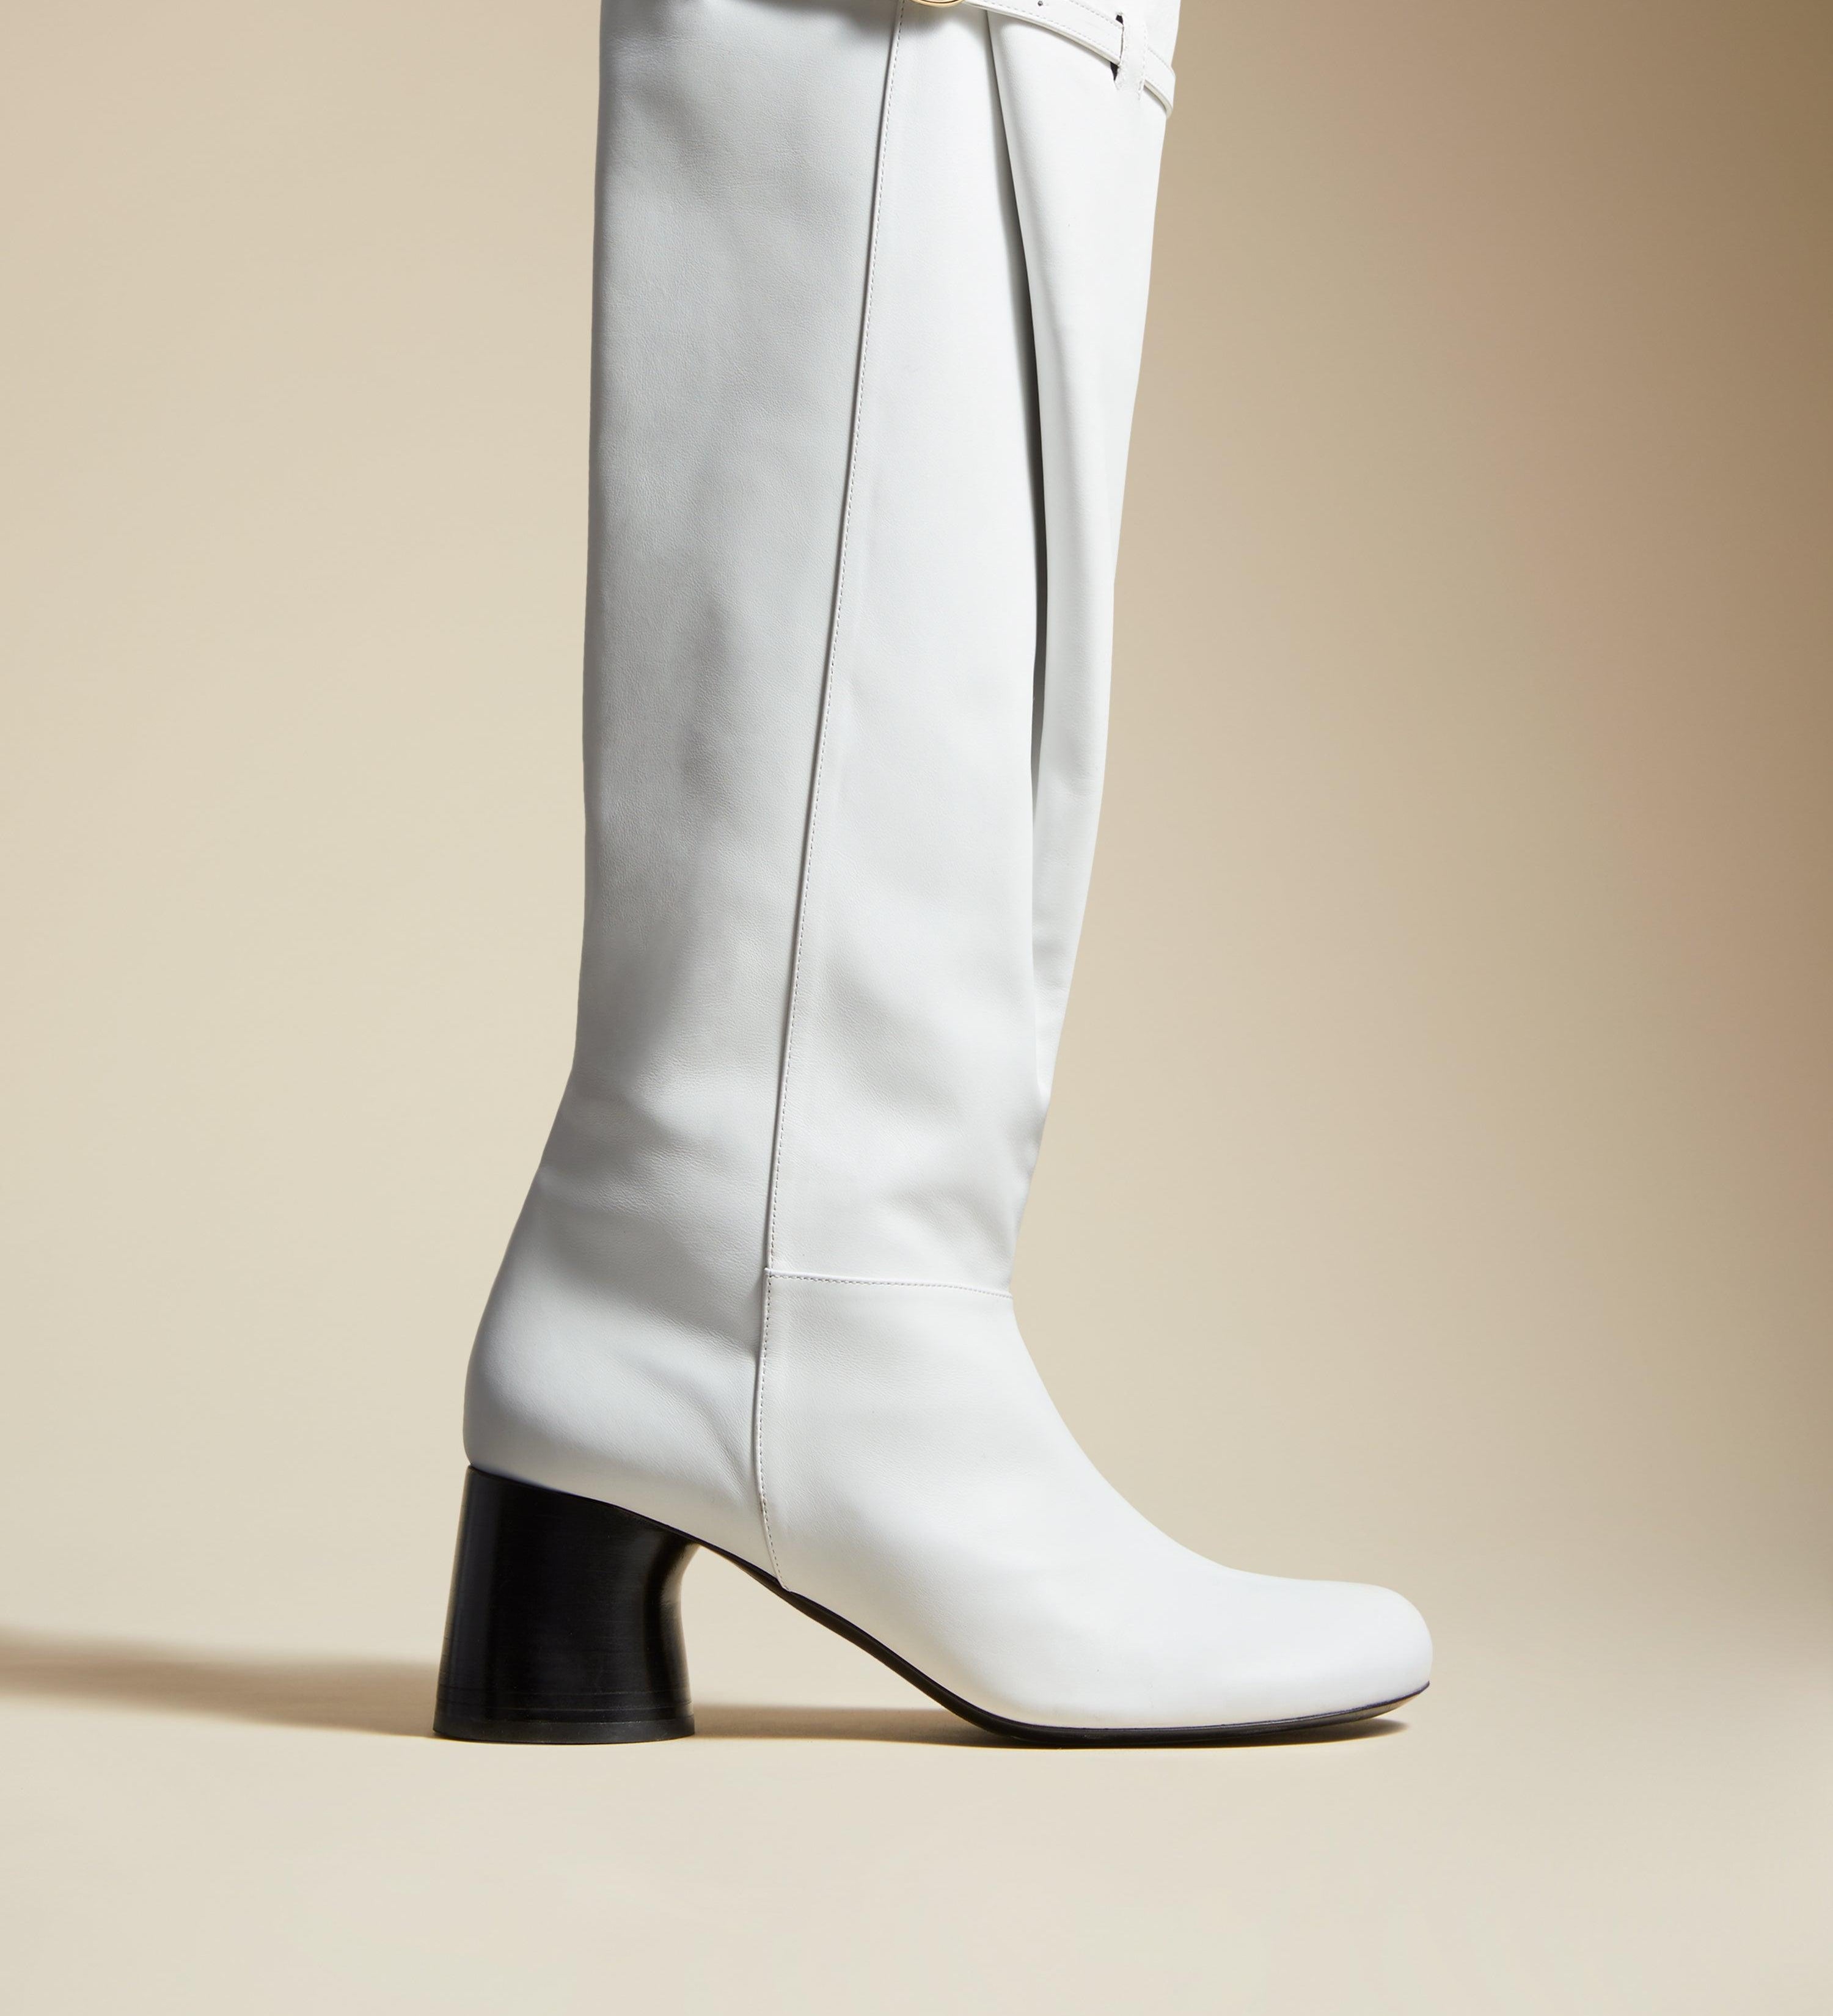 The Admiral Knee-High Boot in White Leather - The Iconic Issue